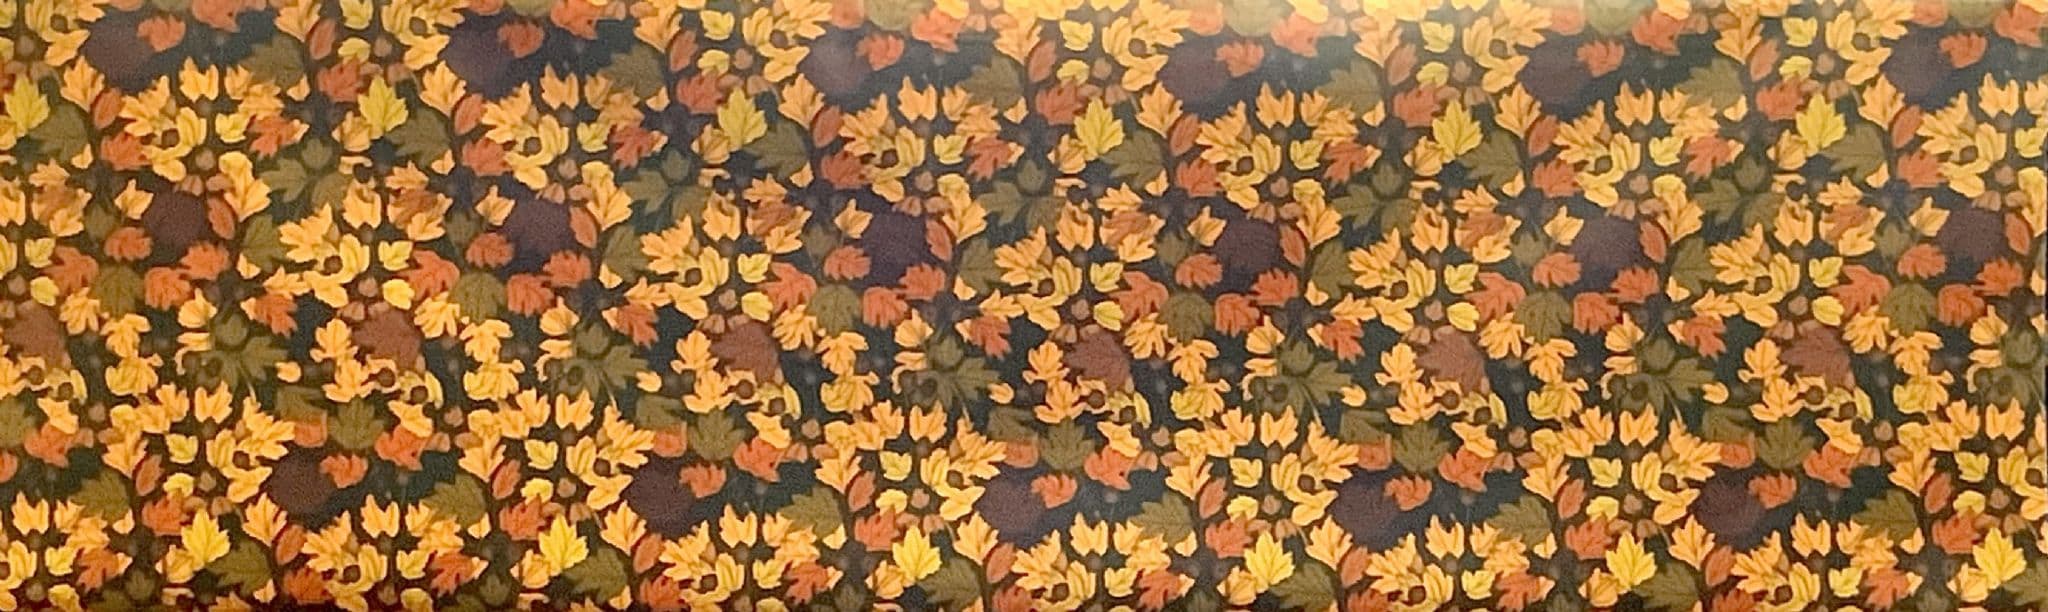 Maple Leaves Extra Wide Acrylic Oilcloth in Ochre